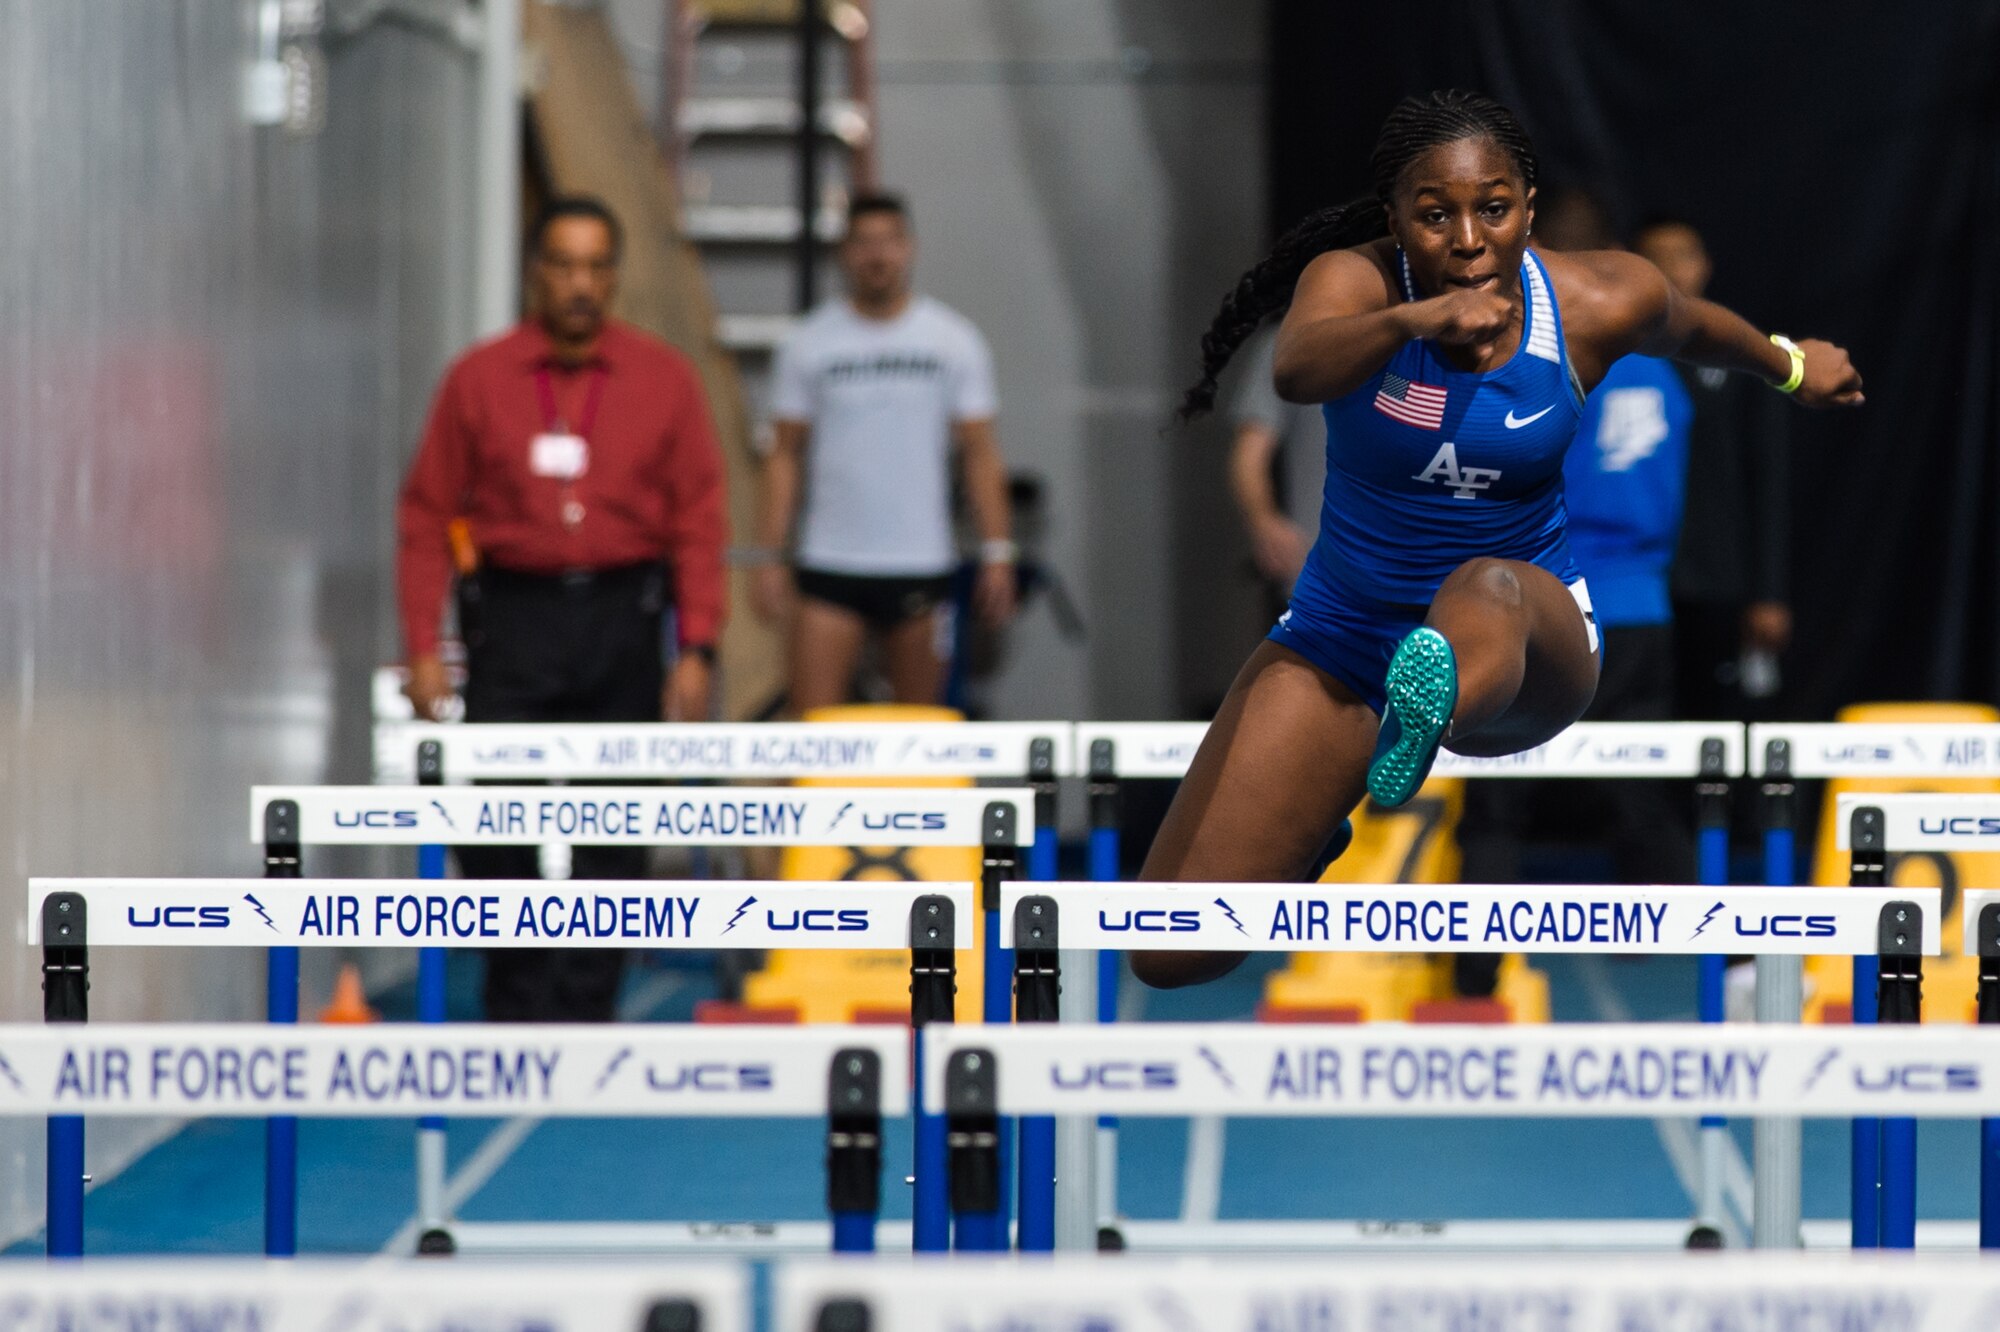 U.S. Air Force Academy cadet, leaps over a hurdle during her 60m hurdle race